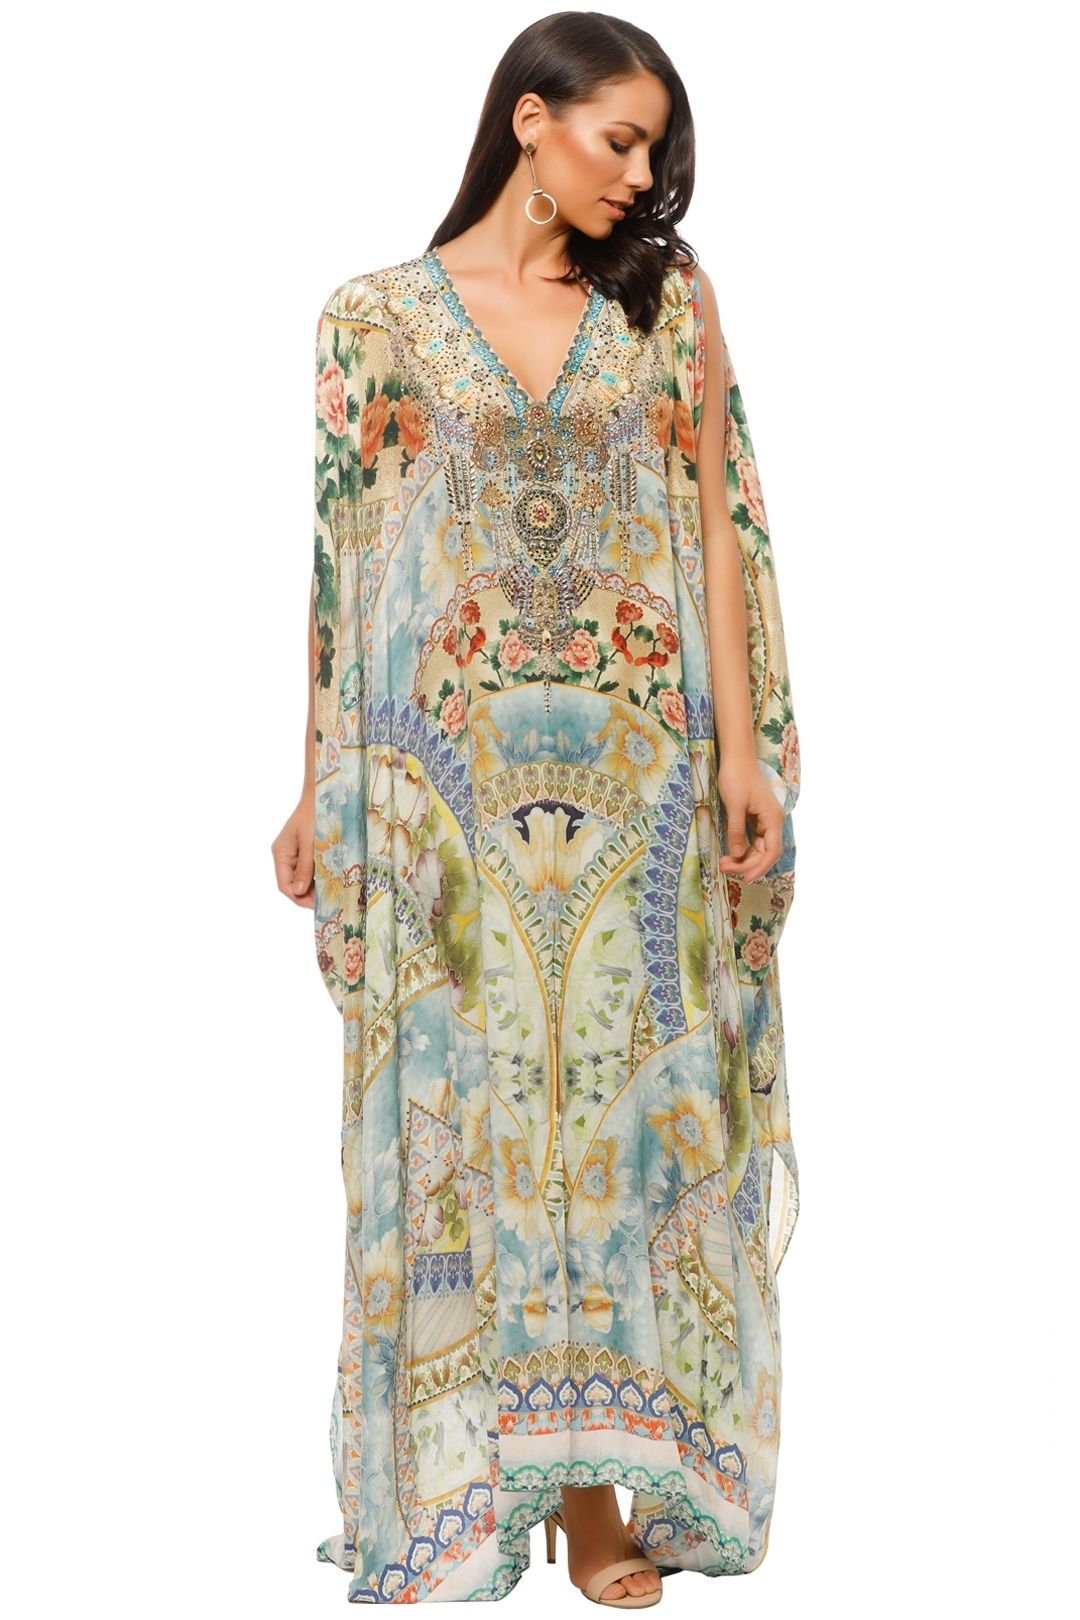 Camilla - Sign of Peace Split Front Sleeve Kaftan - Prints - Front Style 3